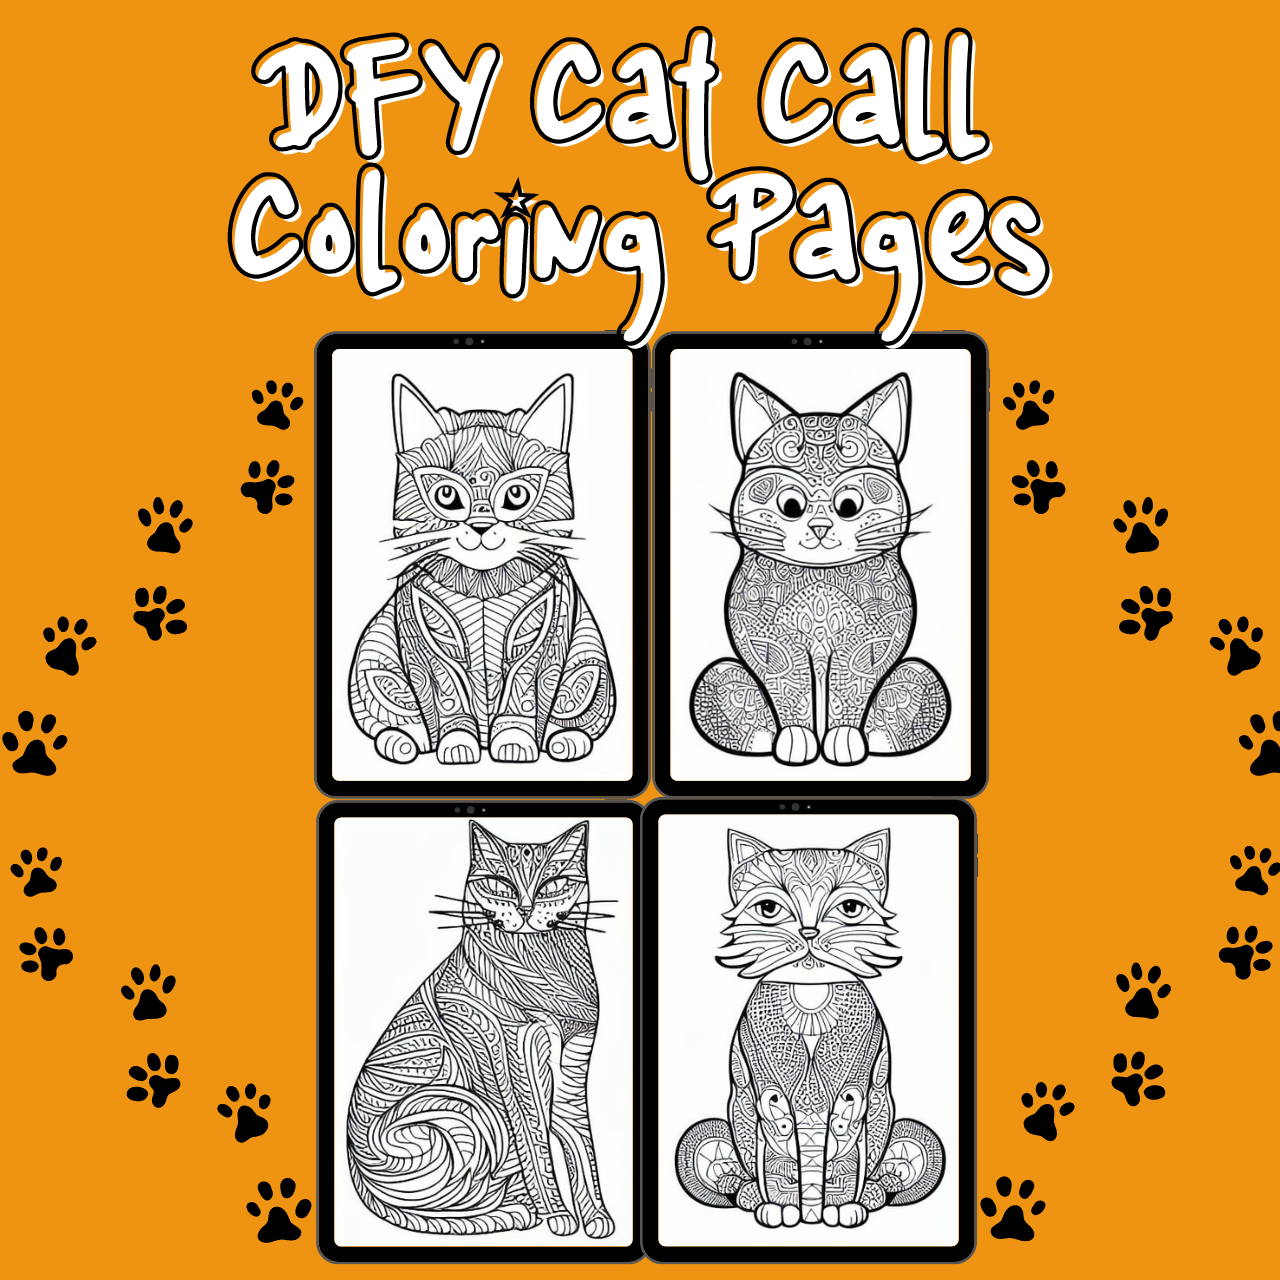 DFY Cat Call Coloring Pages Unrestricted PLR